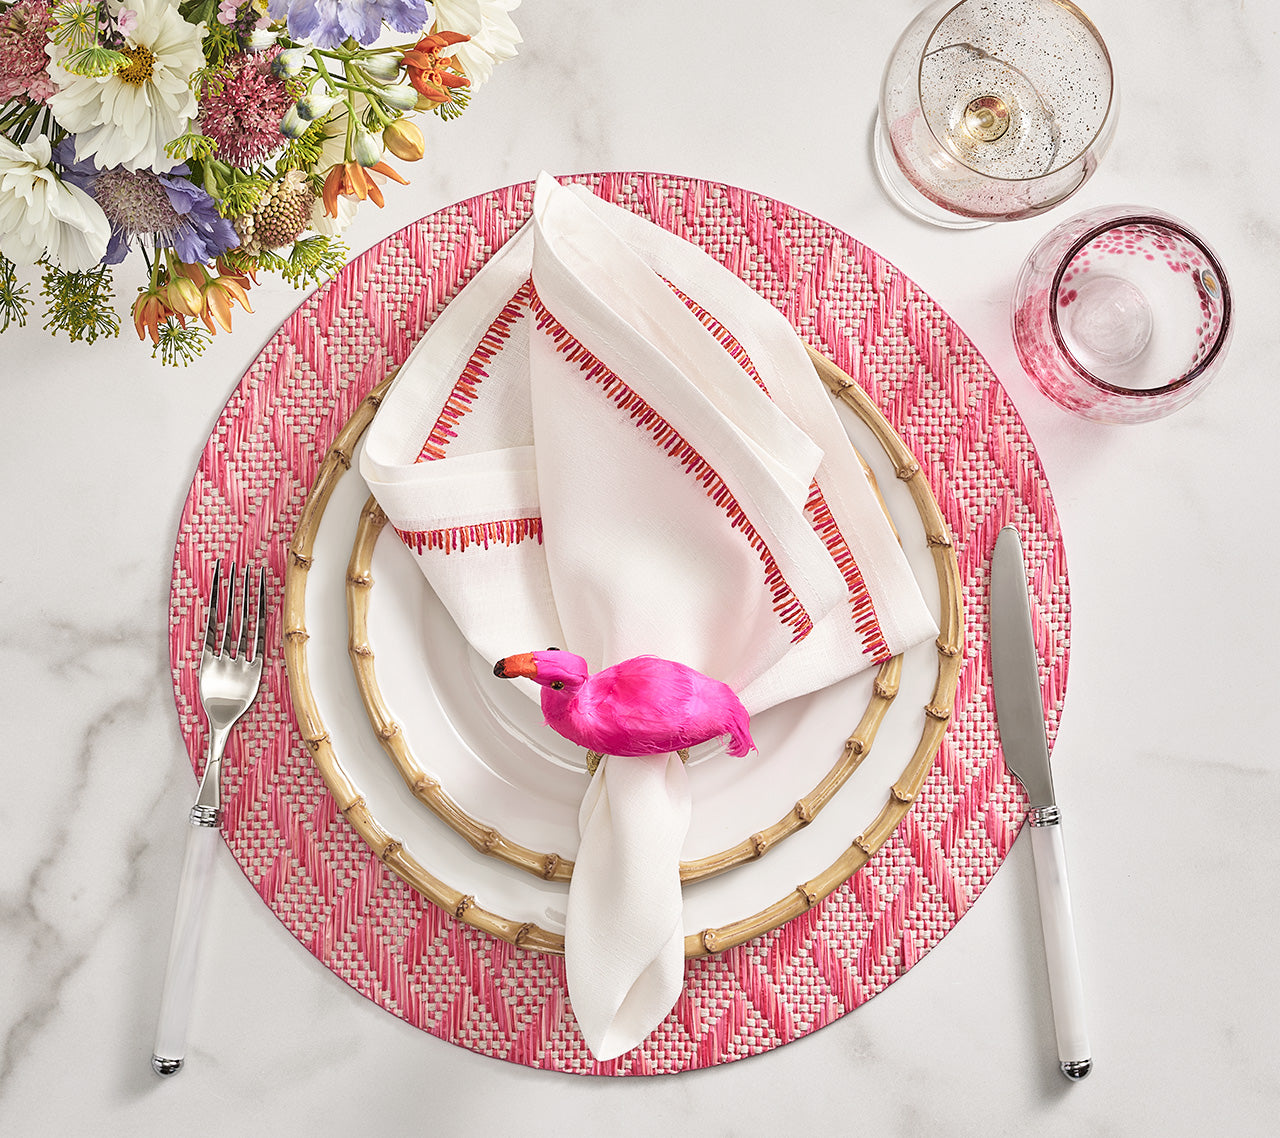 Round Basketweave Placemat in pink